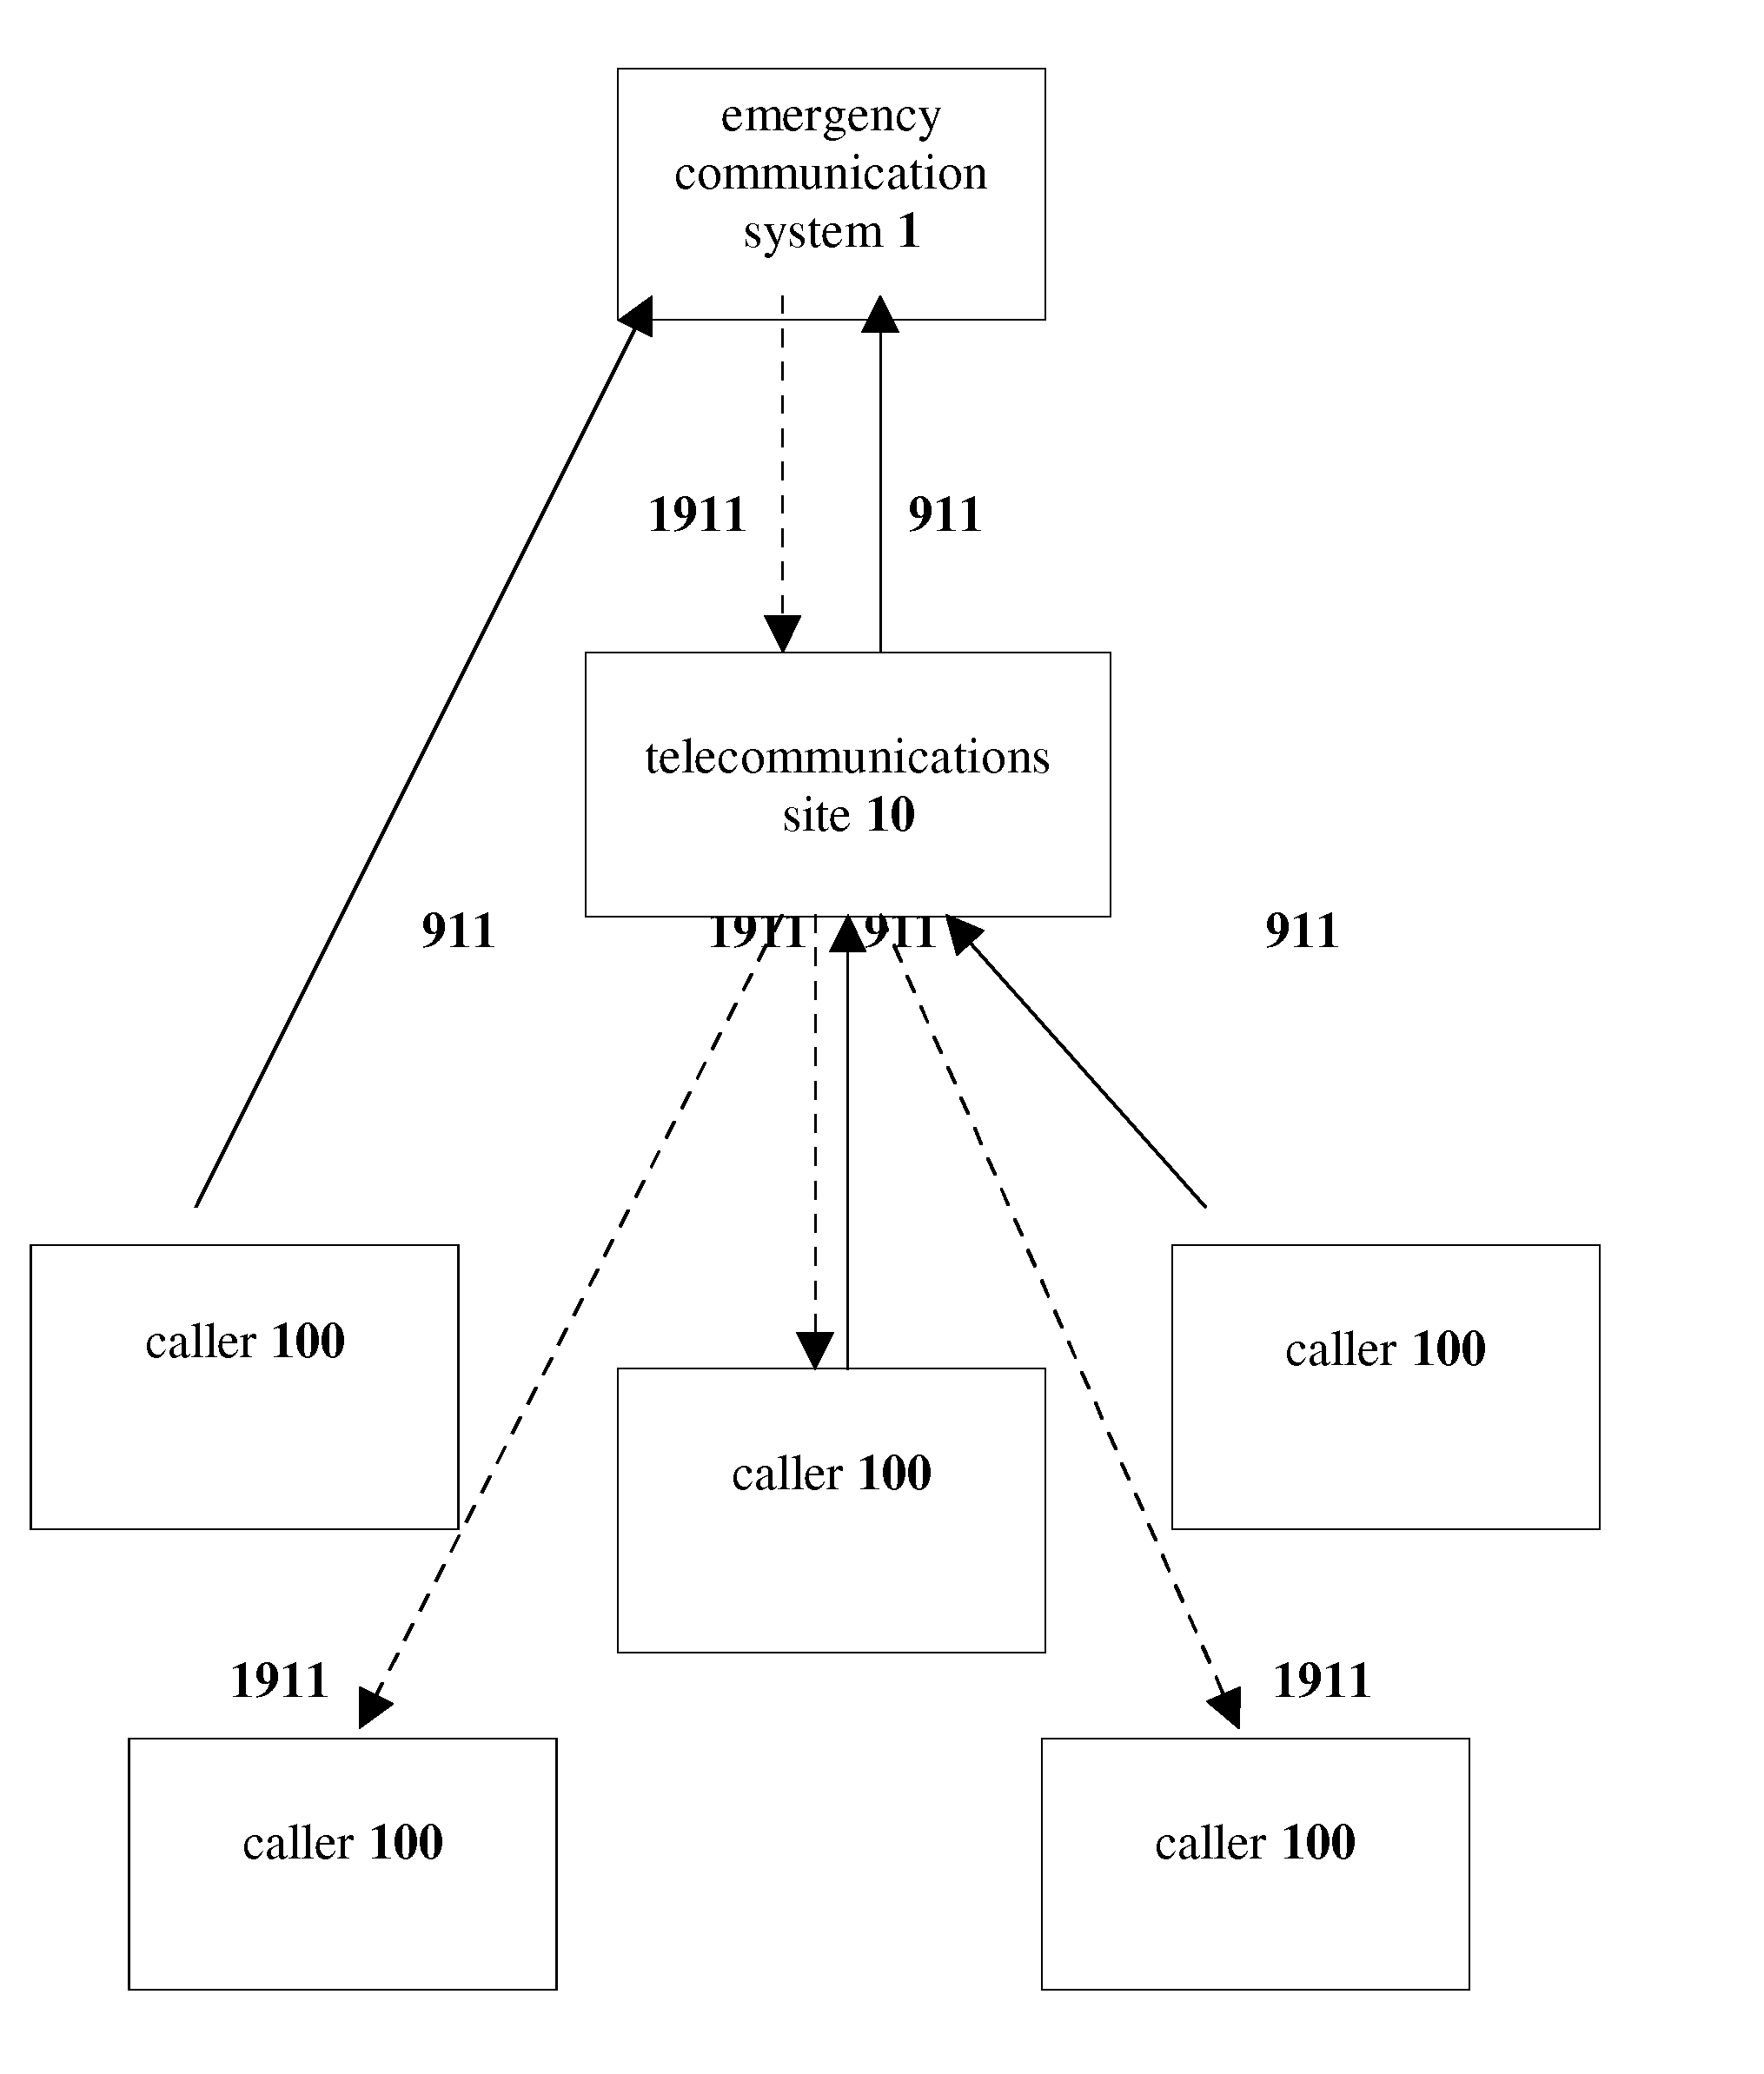 Method and system for preventing emergency communication system notification congestion